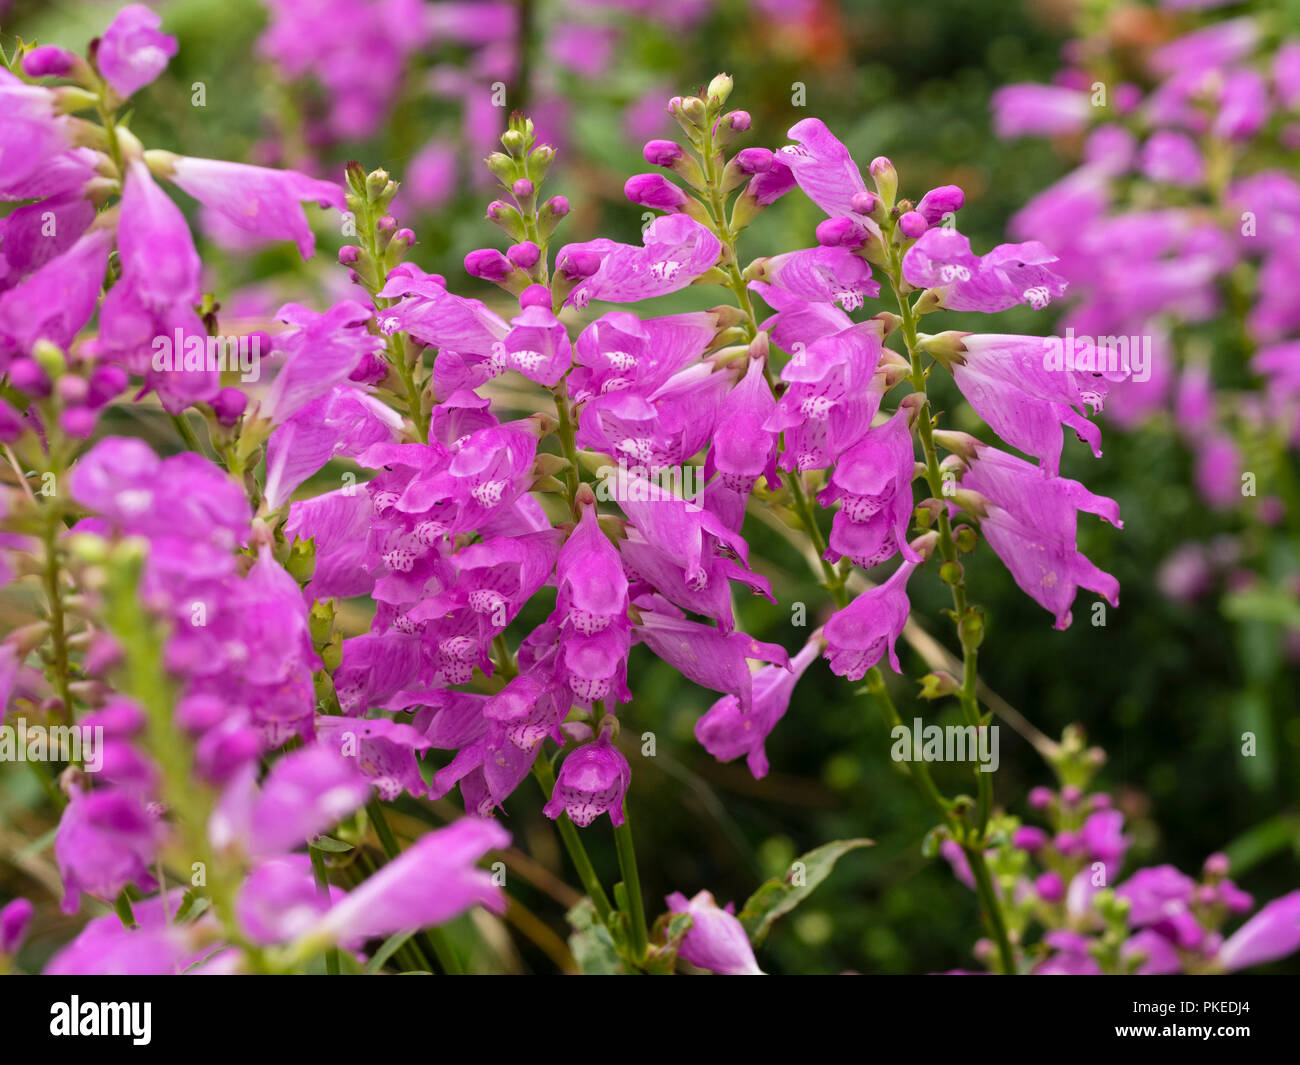 LAte summer pink flowers on upright stems of the hardy perennial obedient plant, Physostegia virginiana Stock Photo